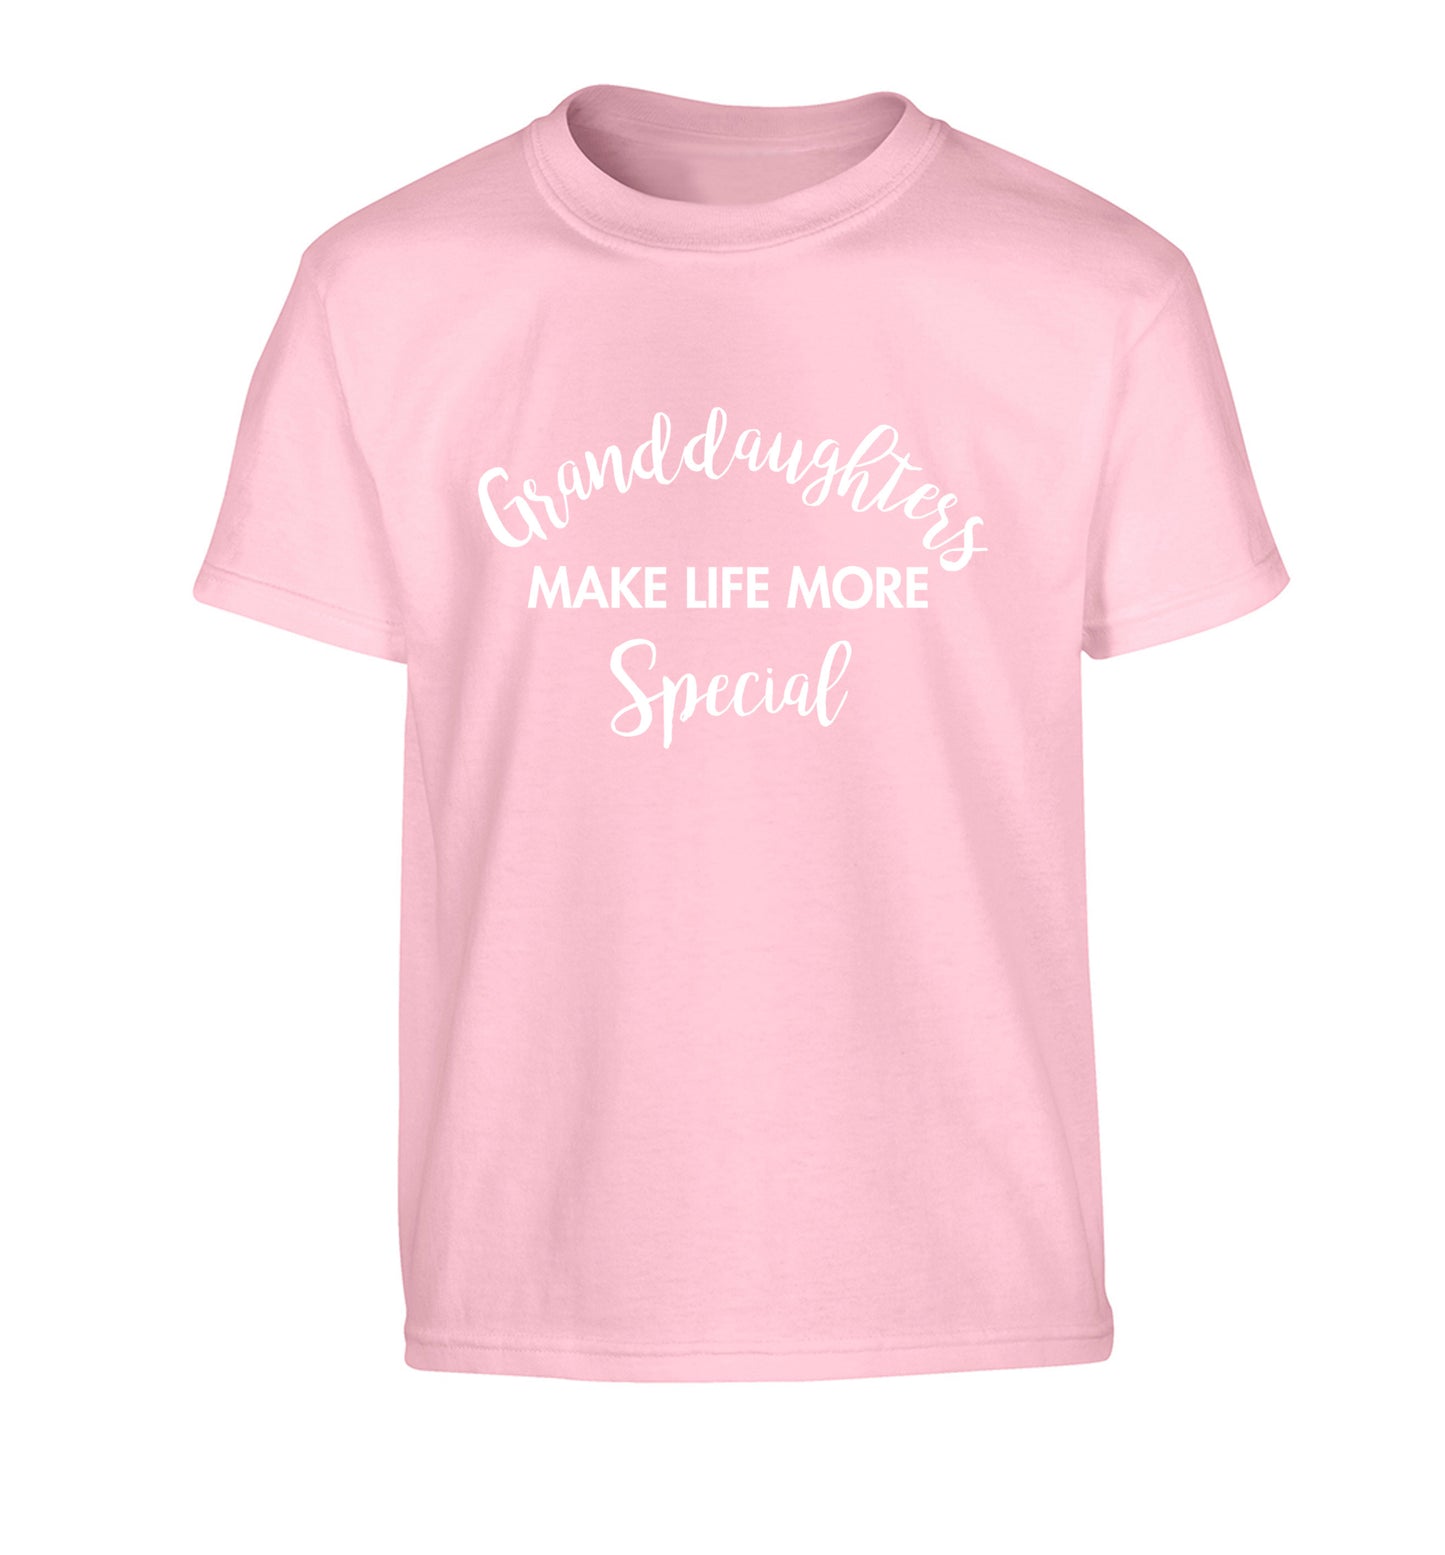 Granddaughters make life more special Children's light pink Tshirt 12-14 Years